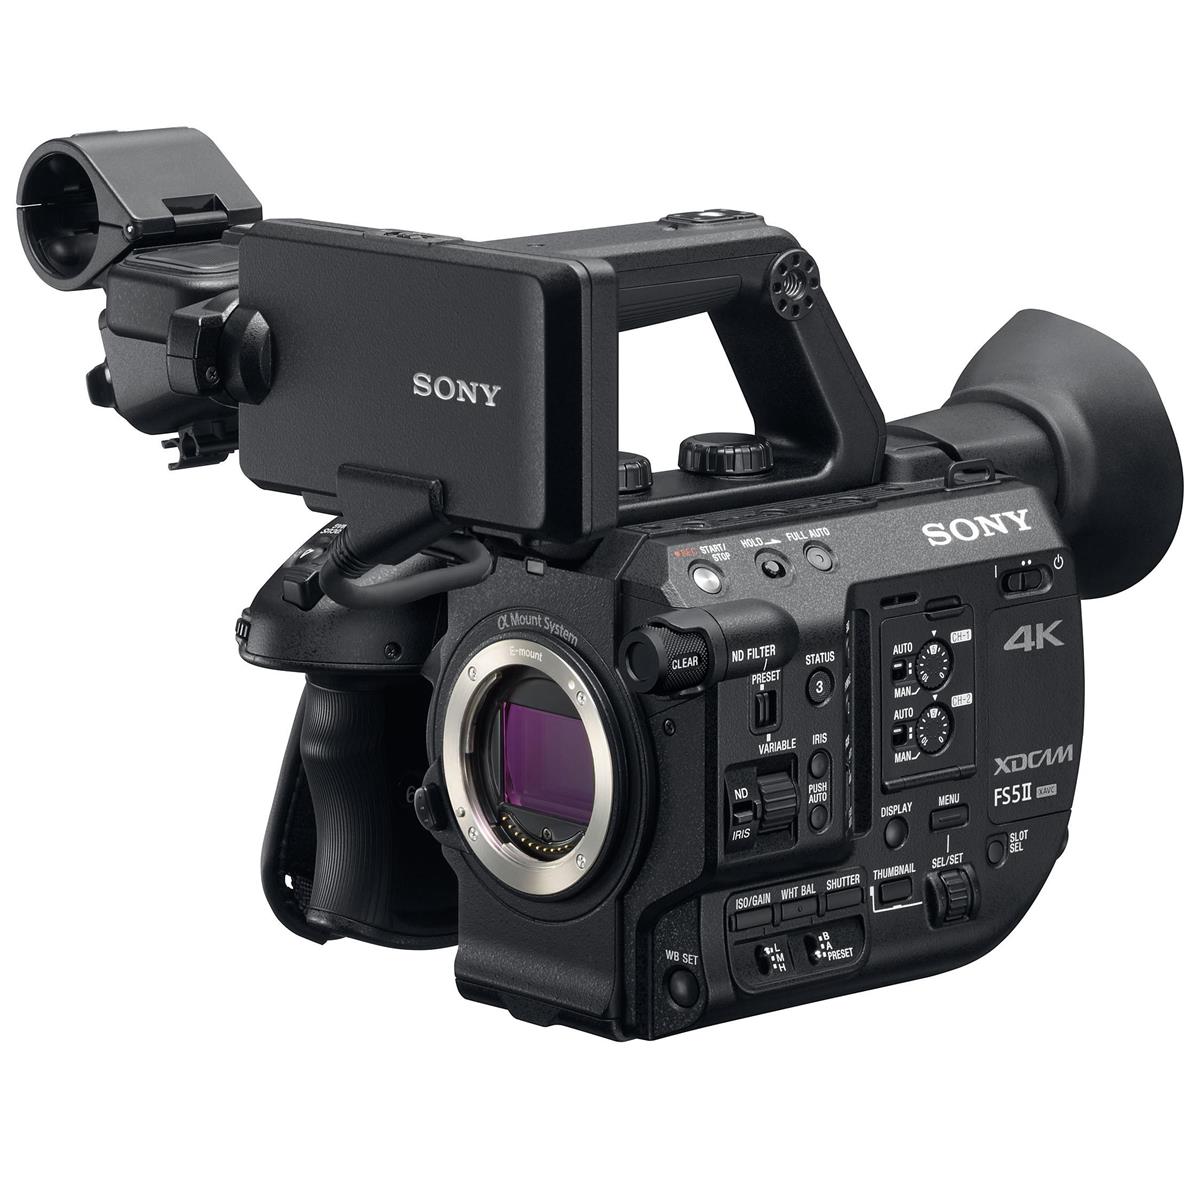 Sony FS5 II camcorder